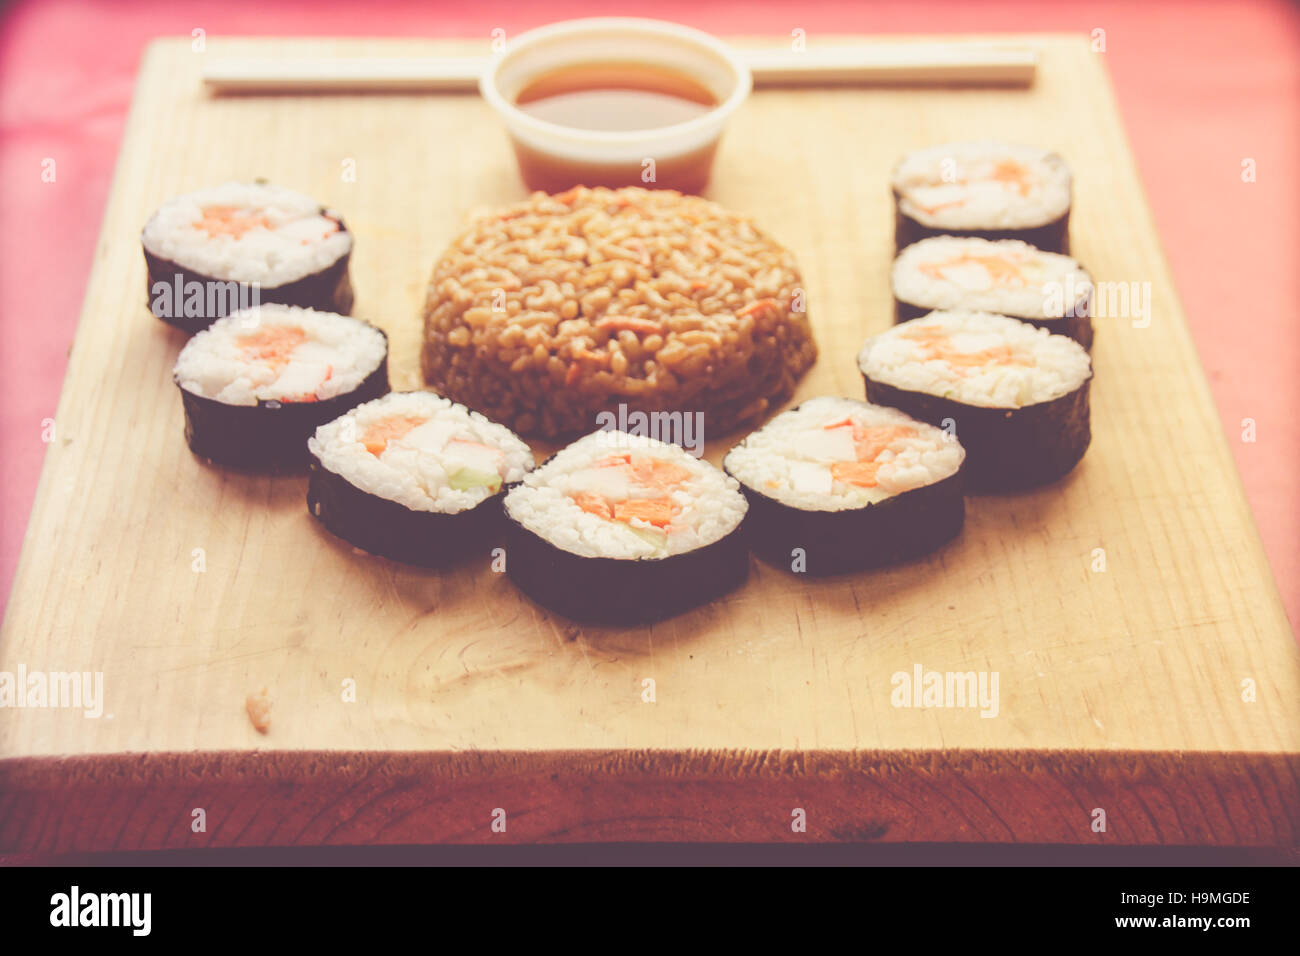 Phtograph of some Sushi roll slices and fried rice on a wood table Stock Photo